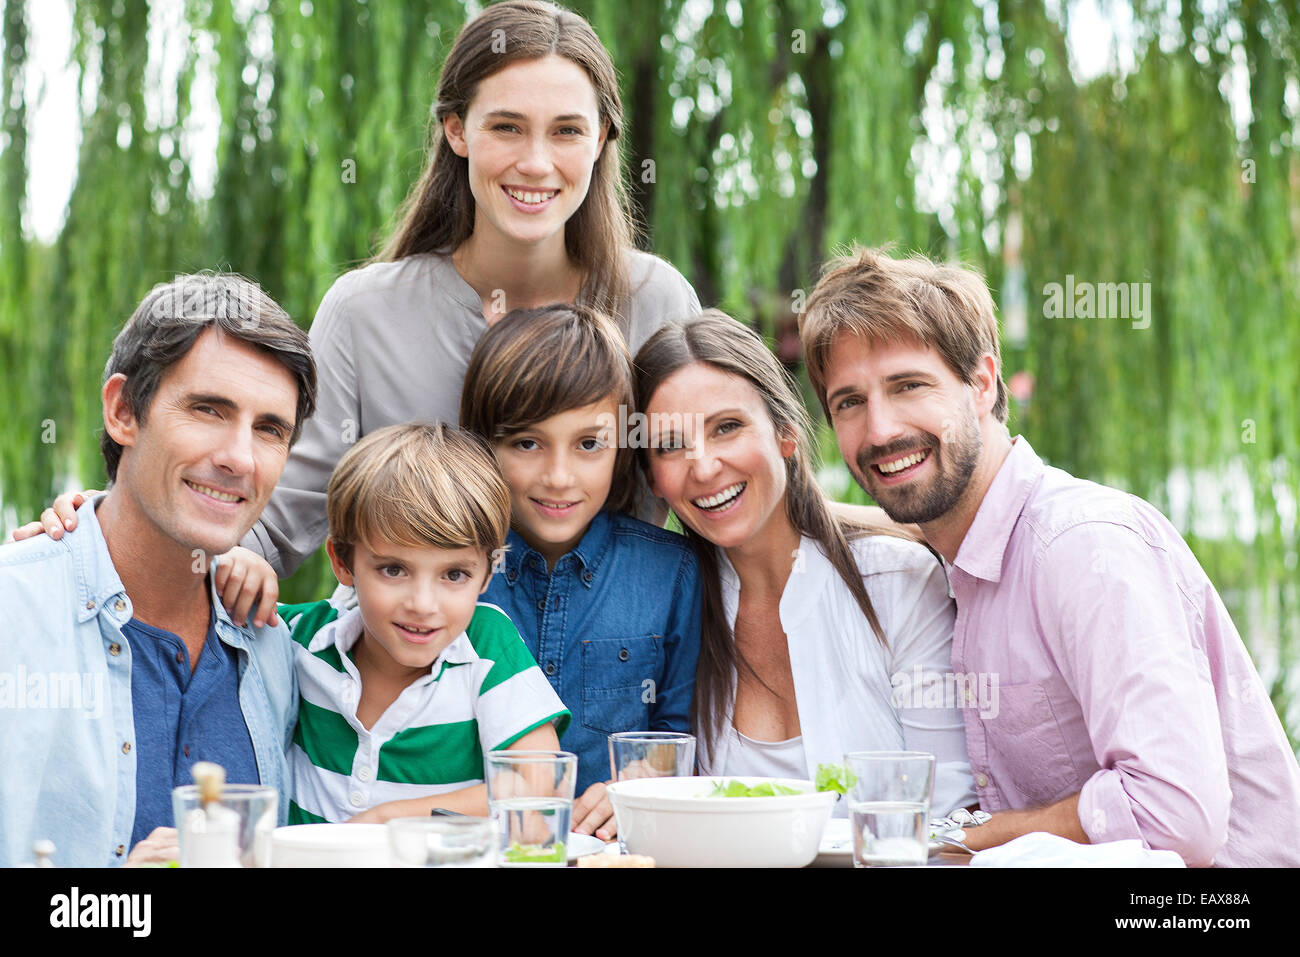 Family posing for portrait at outdoor gathering Stock Photo